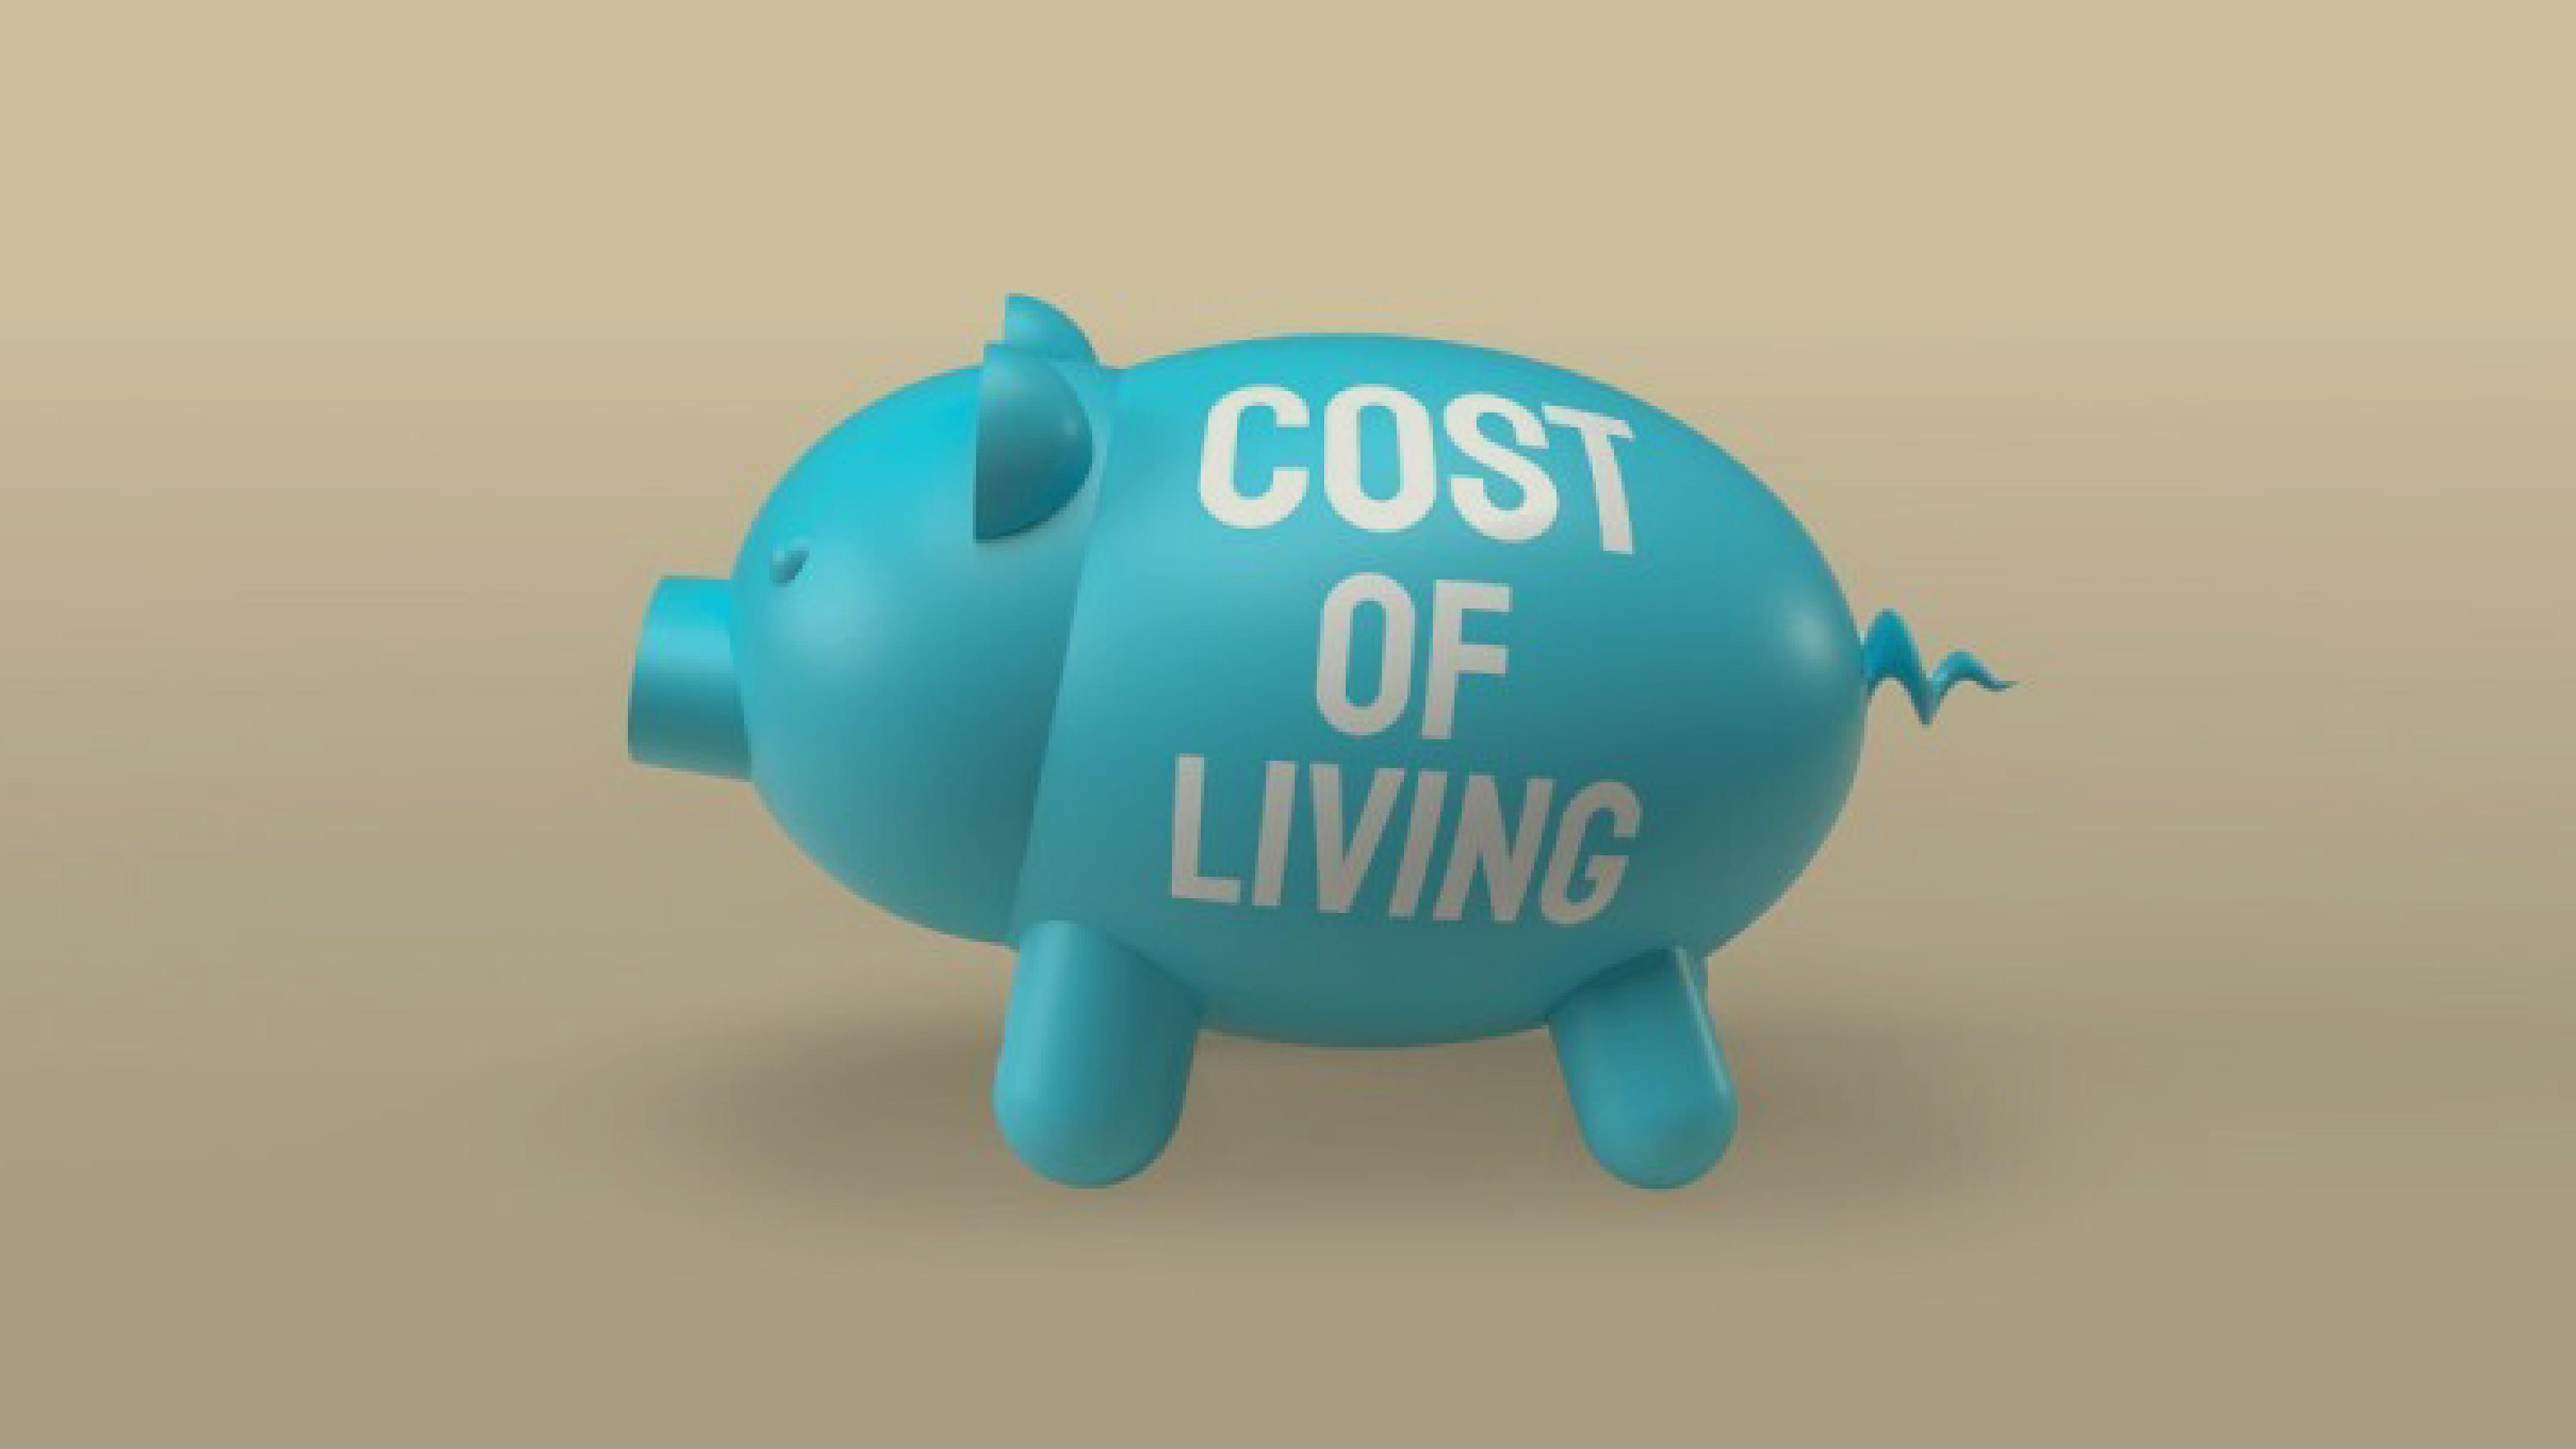 Cost of living text printed on a piggy bank